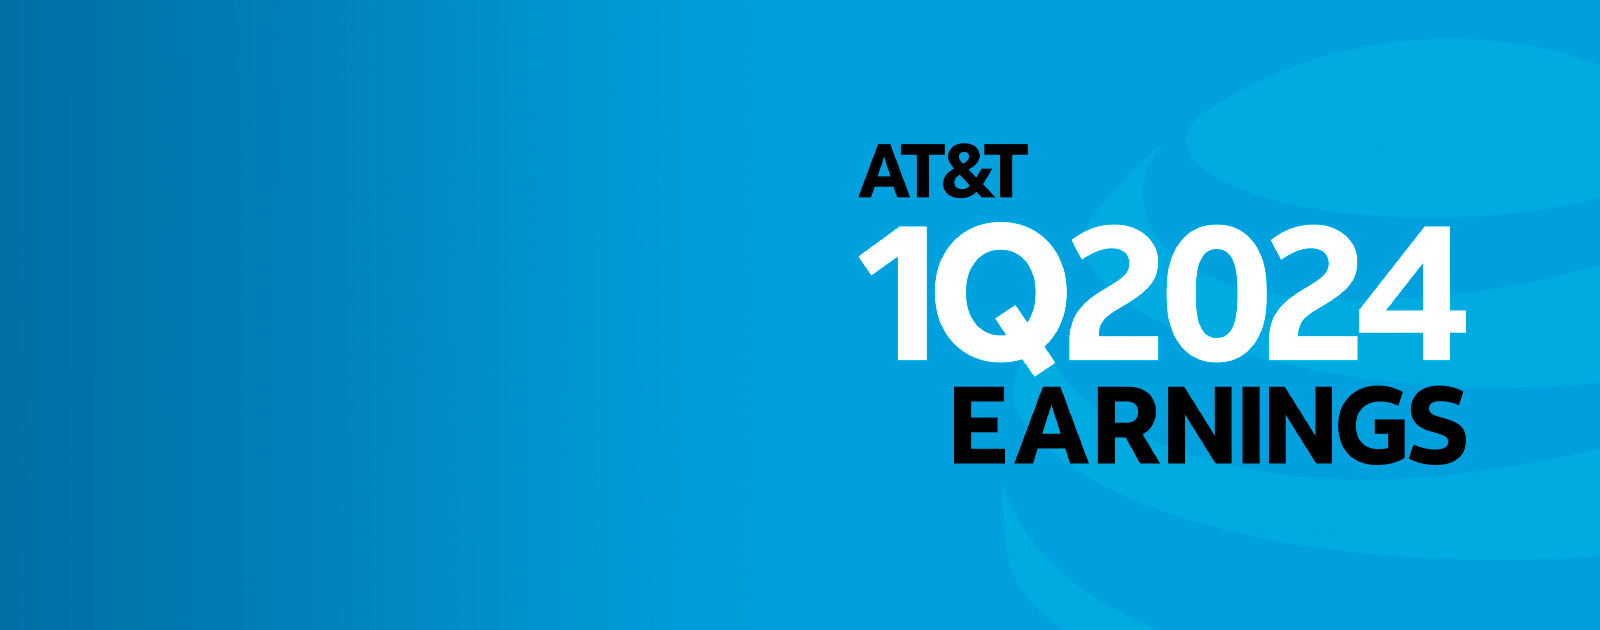 AT&T 1Q24 Earnings